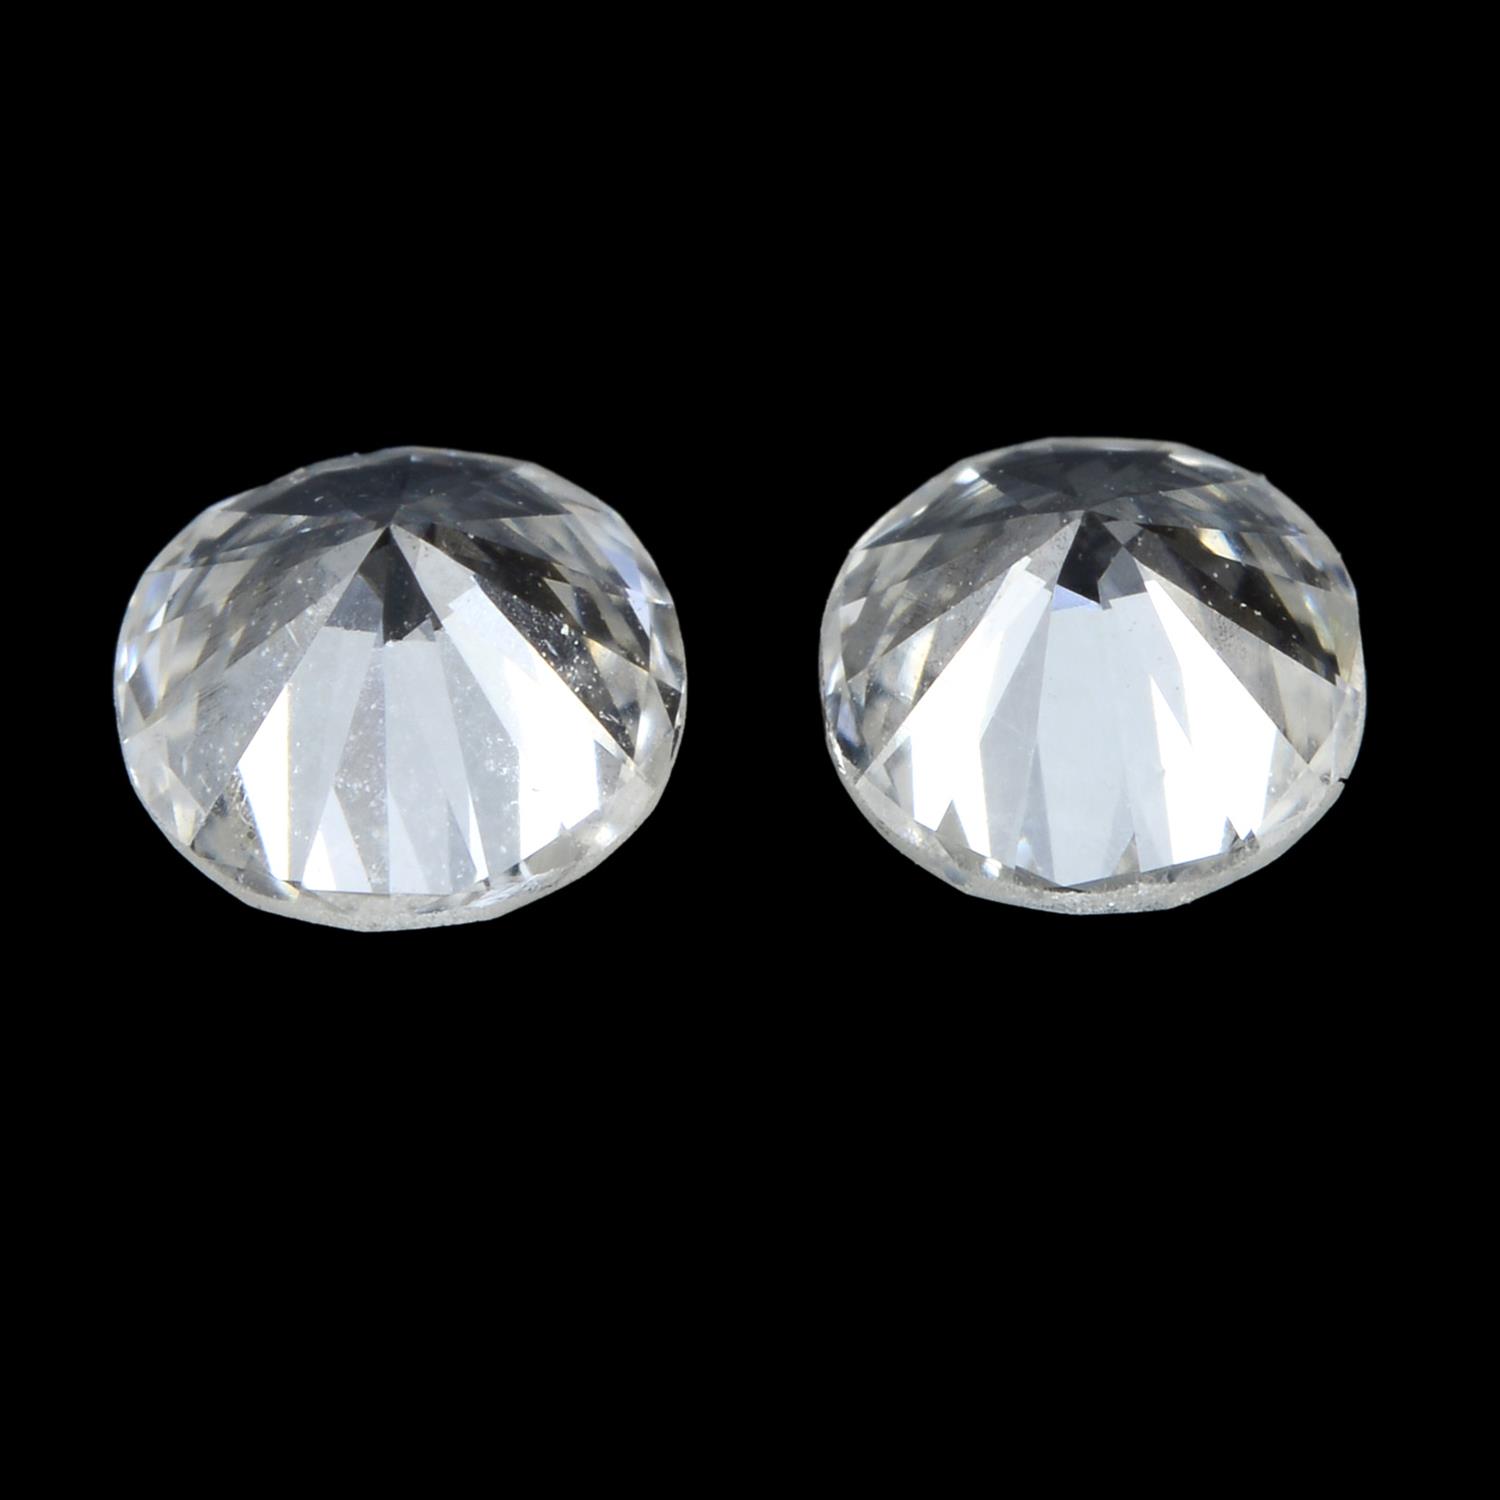 Pair of brilliant cut diamonds weighing 0.54ct - Image 2 of 2